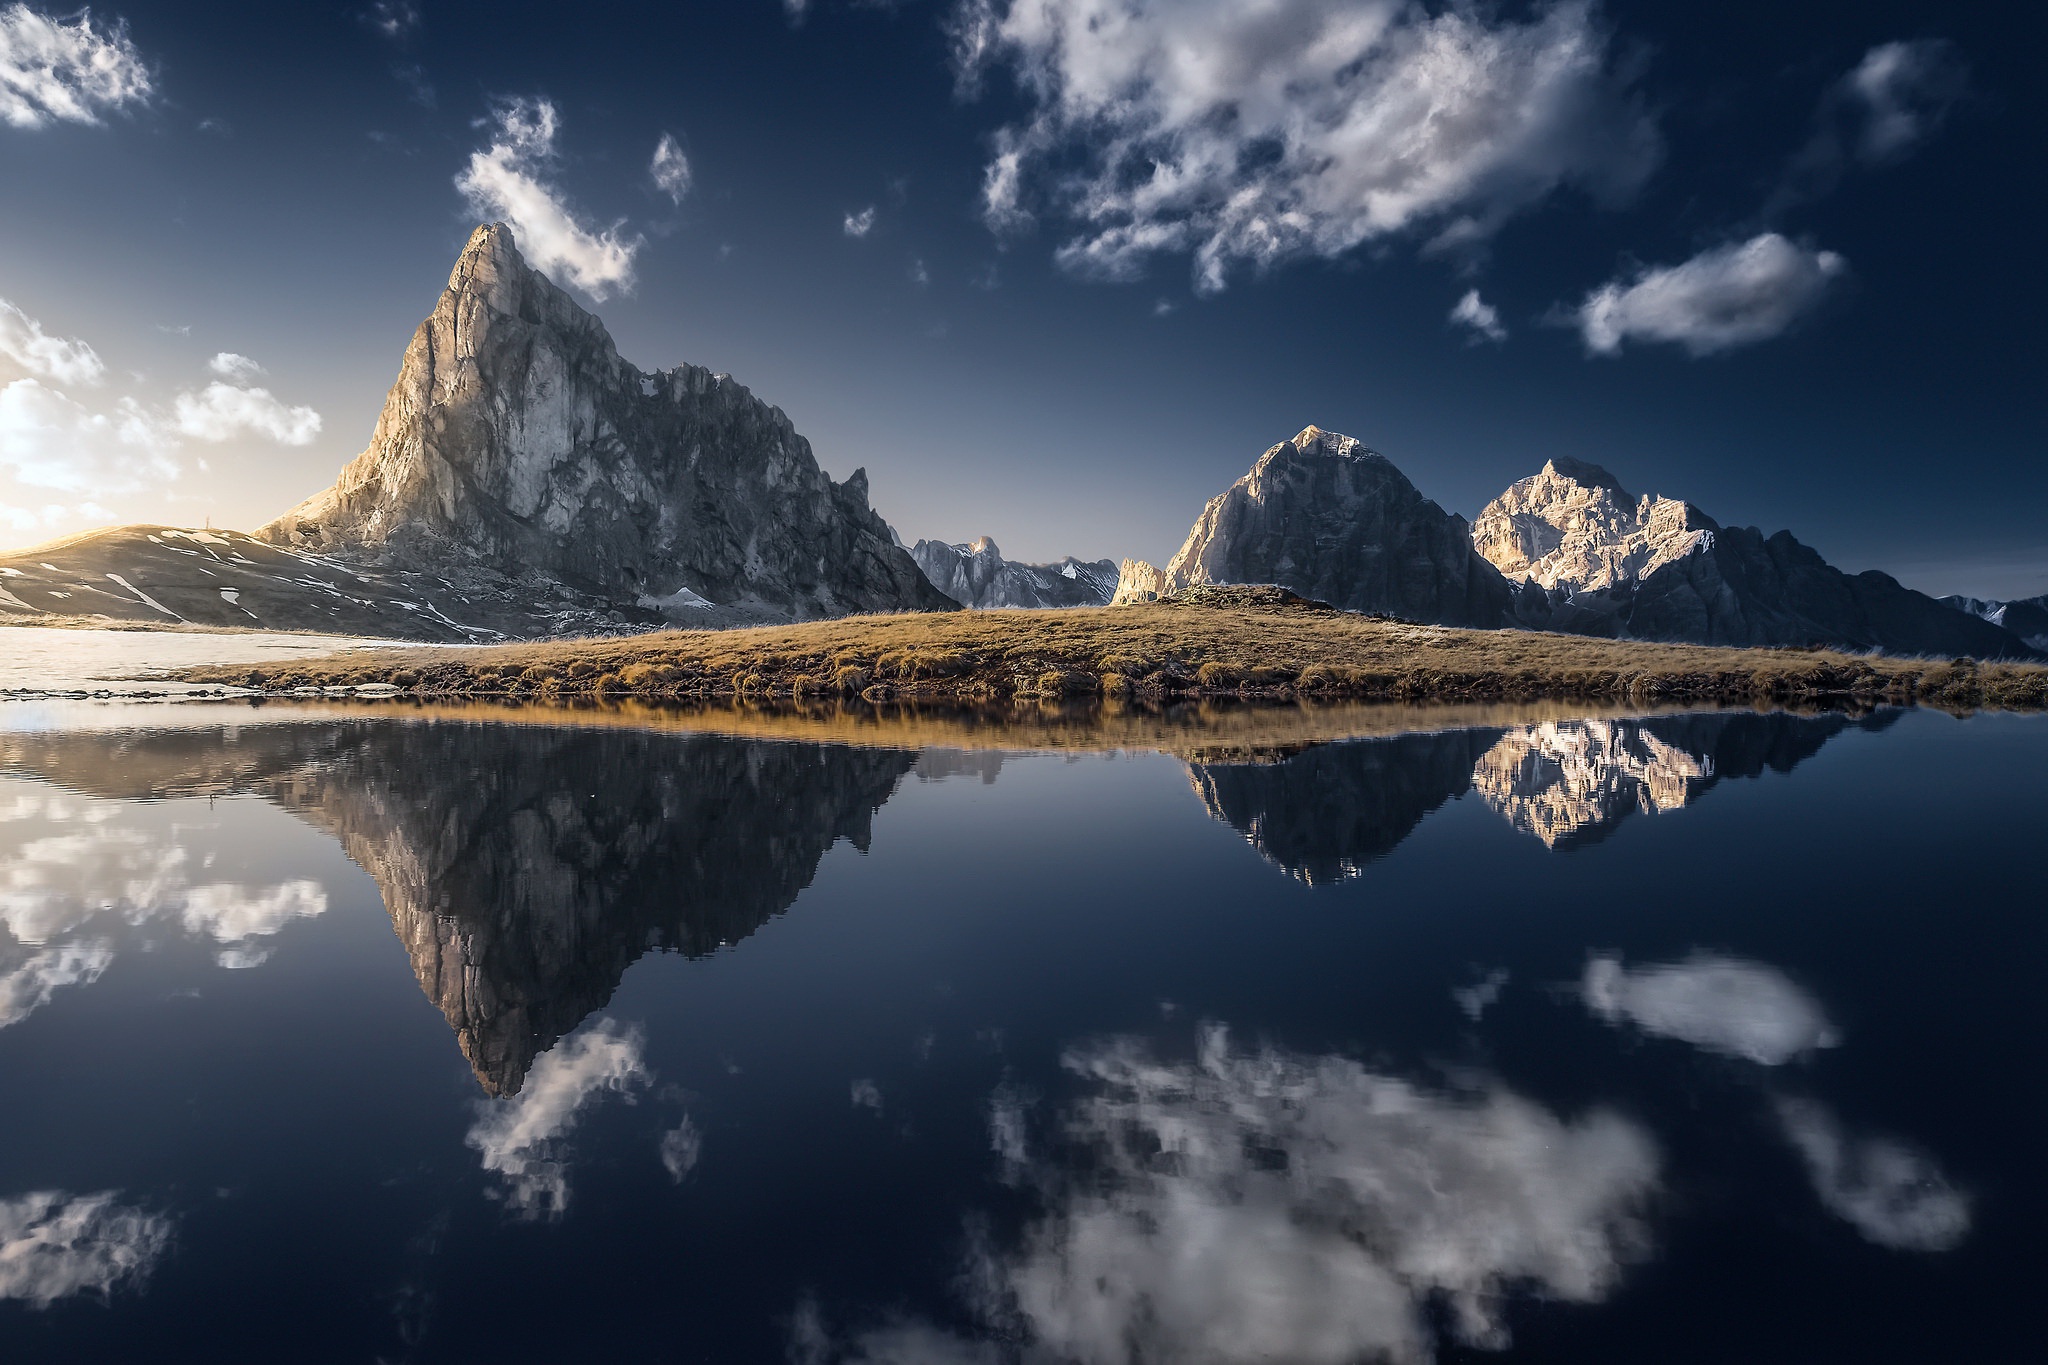 General 2048x1365 mountains landscape nature blue sky reflection water clouds